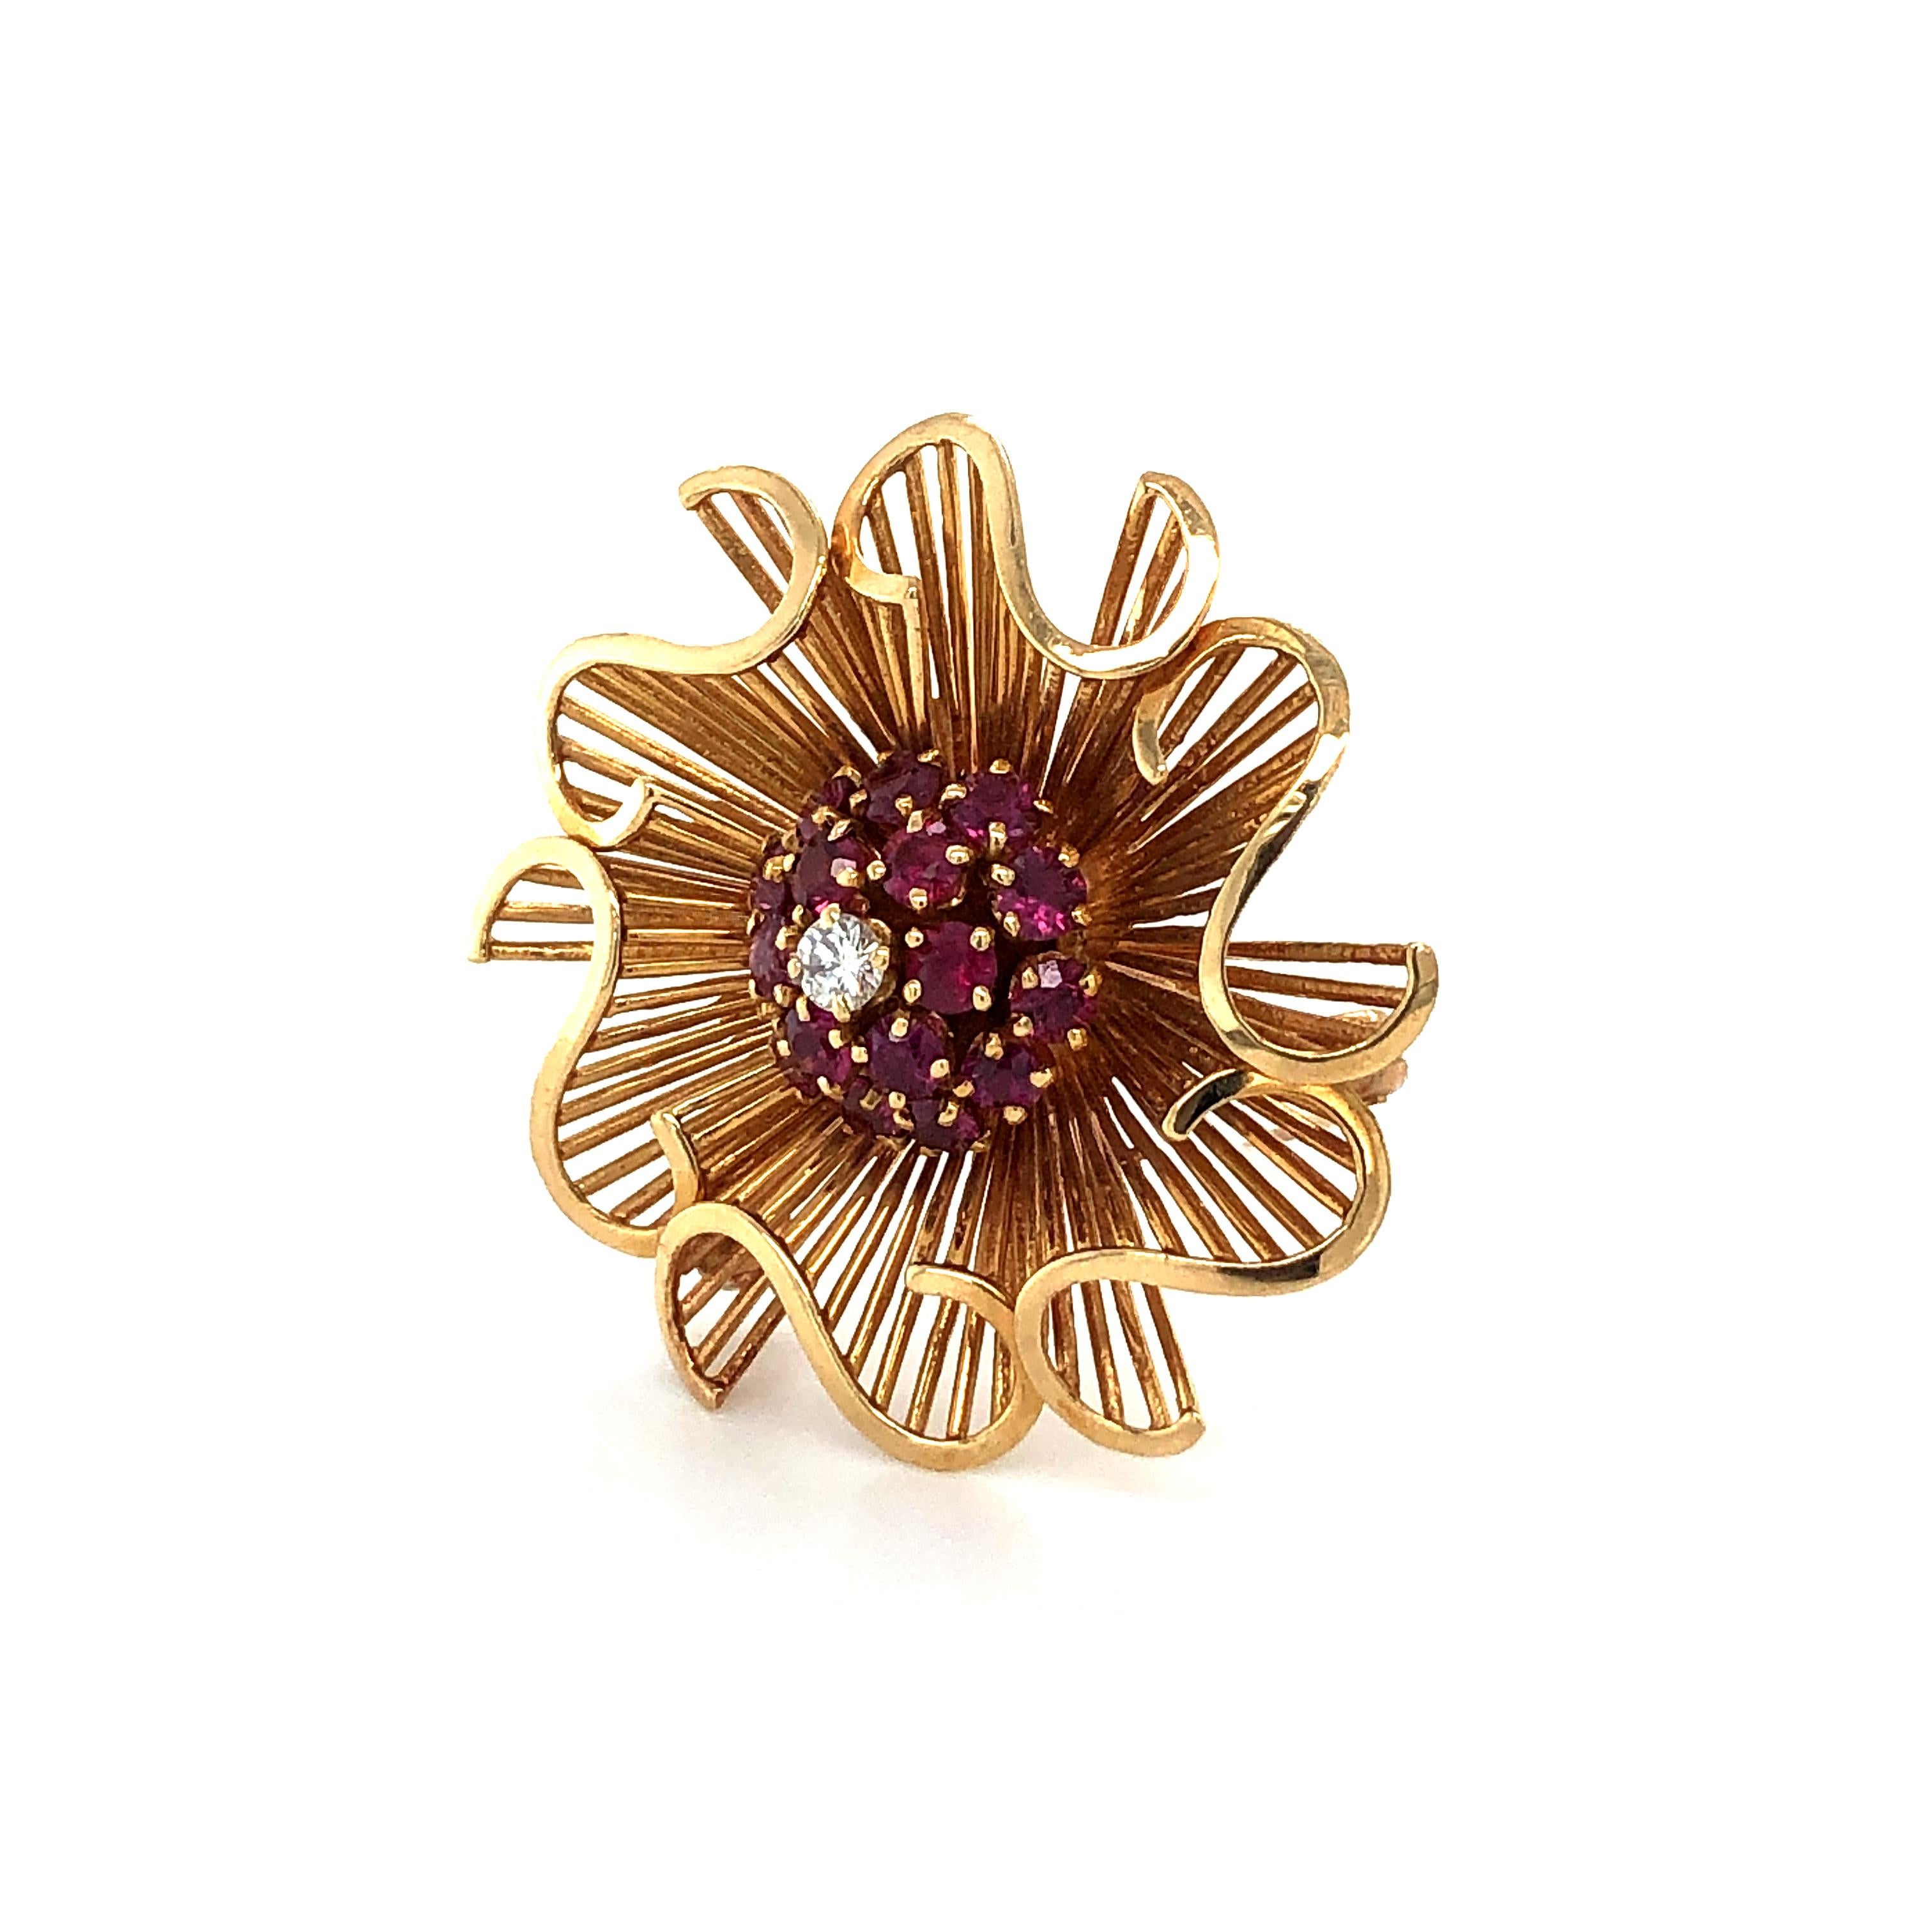 This fabulous 1950s Retro brooch in 14K rose gold is designed as rays arranged in waves surrounding a gemset center. The bombé shaped center of attraction is pavé set with 17 round cut rubies encircling a brilliant-cut diamond.

A very classy look